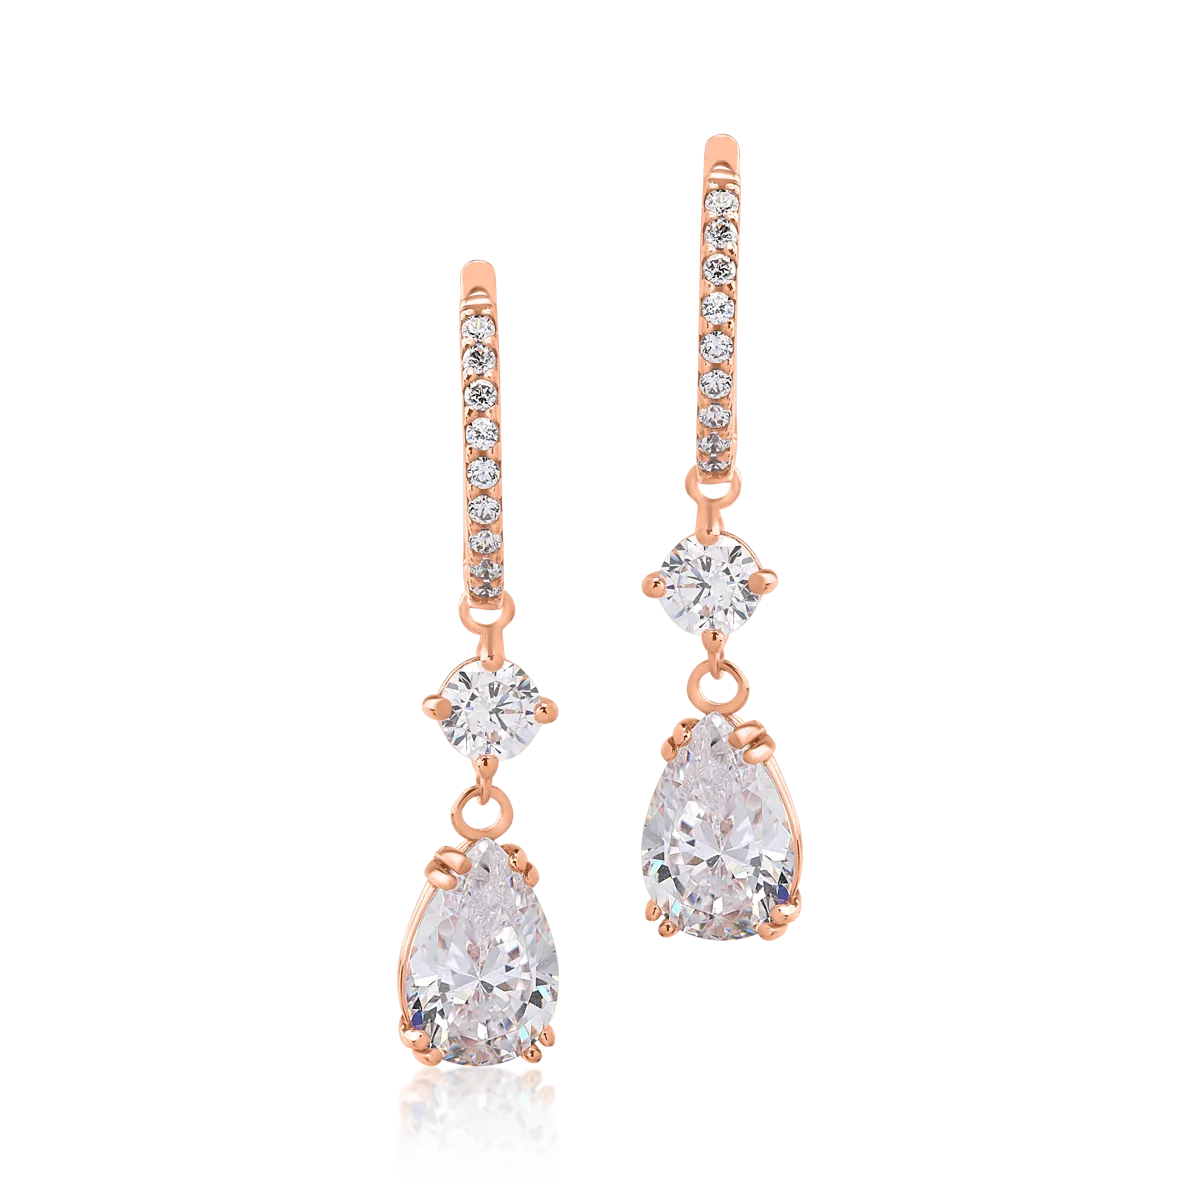 Rose gold long earrings with zirconia